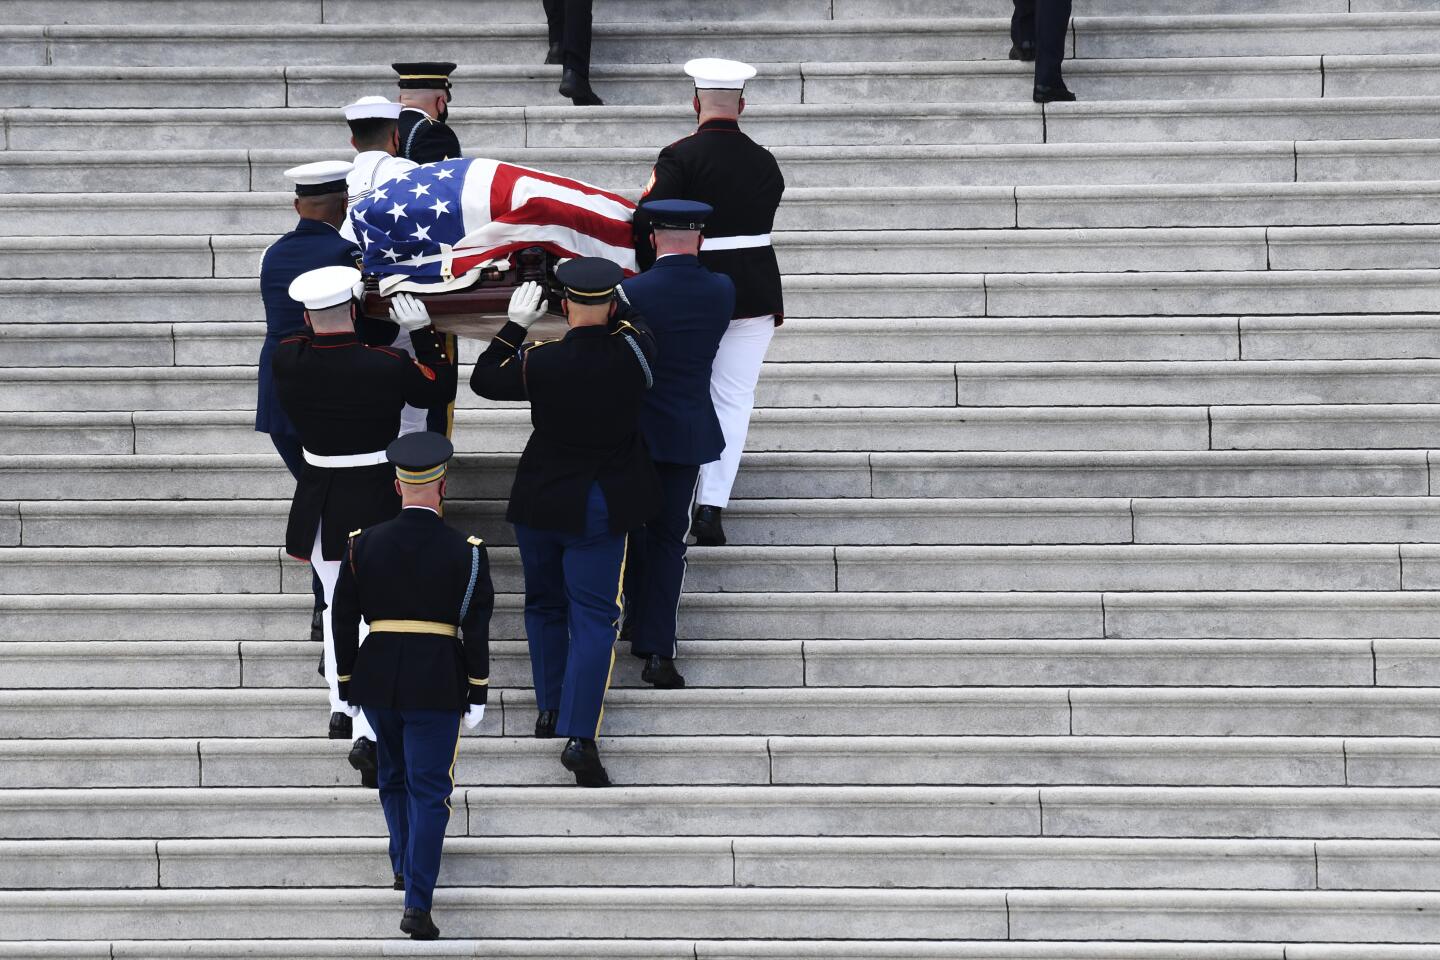 The flag-draped casket of the late Rep. John Lewis, D-Ga., is carried by a joint services military honor guard up the steps of the East front steps of Capitol Hill in Washington Monday.